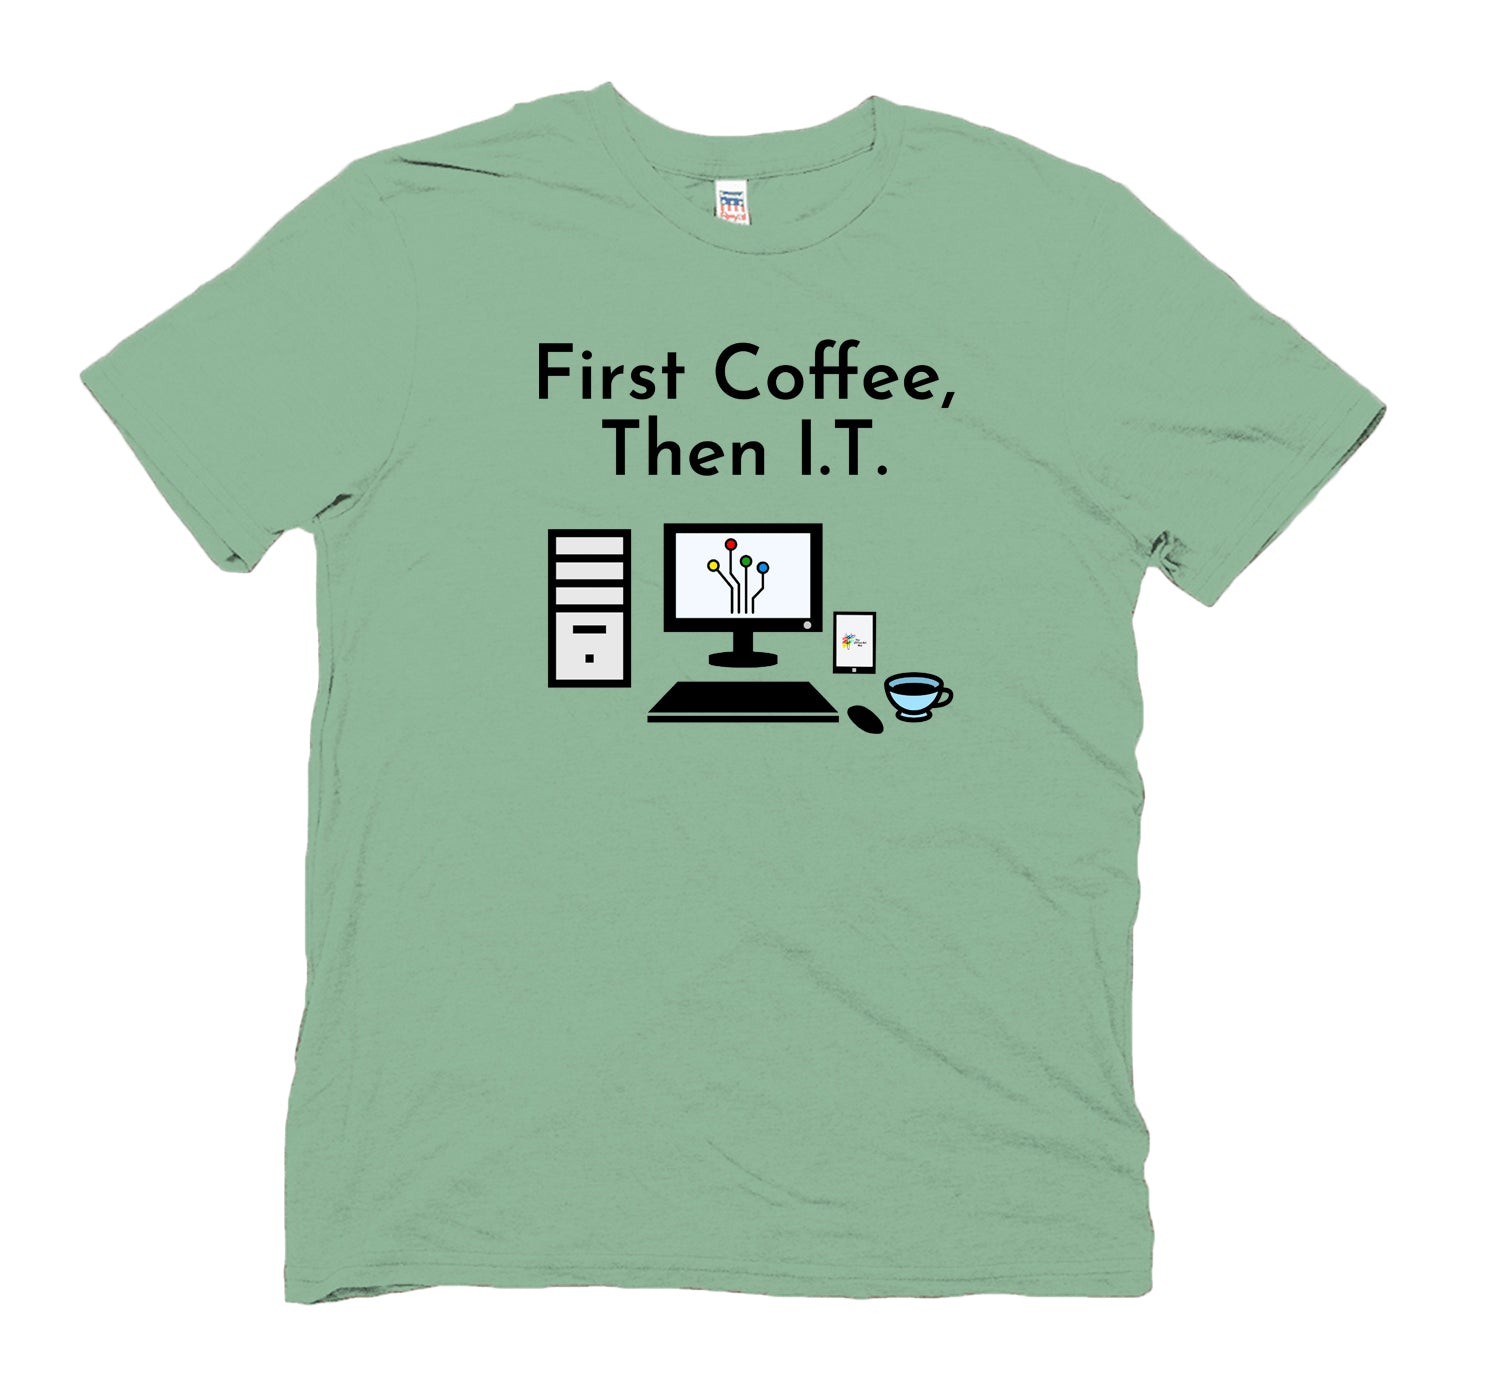 Information Technology T Shirt First Coffee Then I.T. by The Office Art Guy, avocado green color